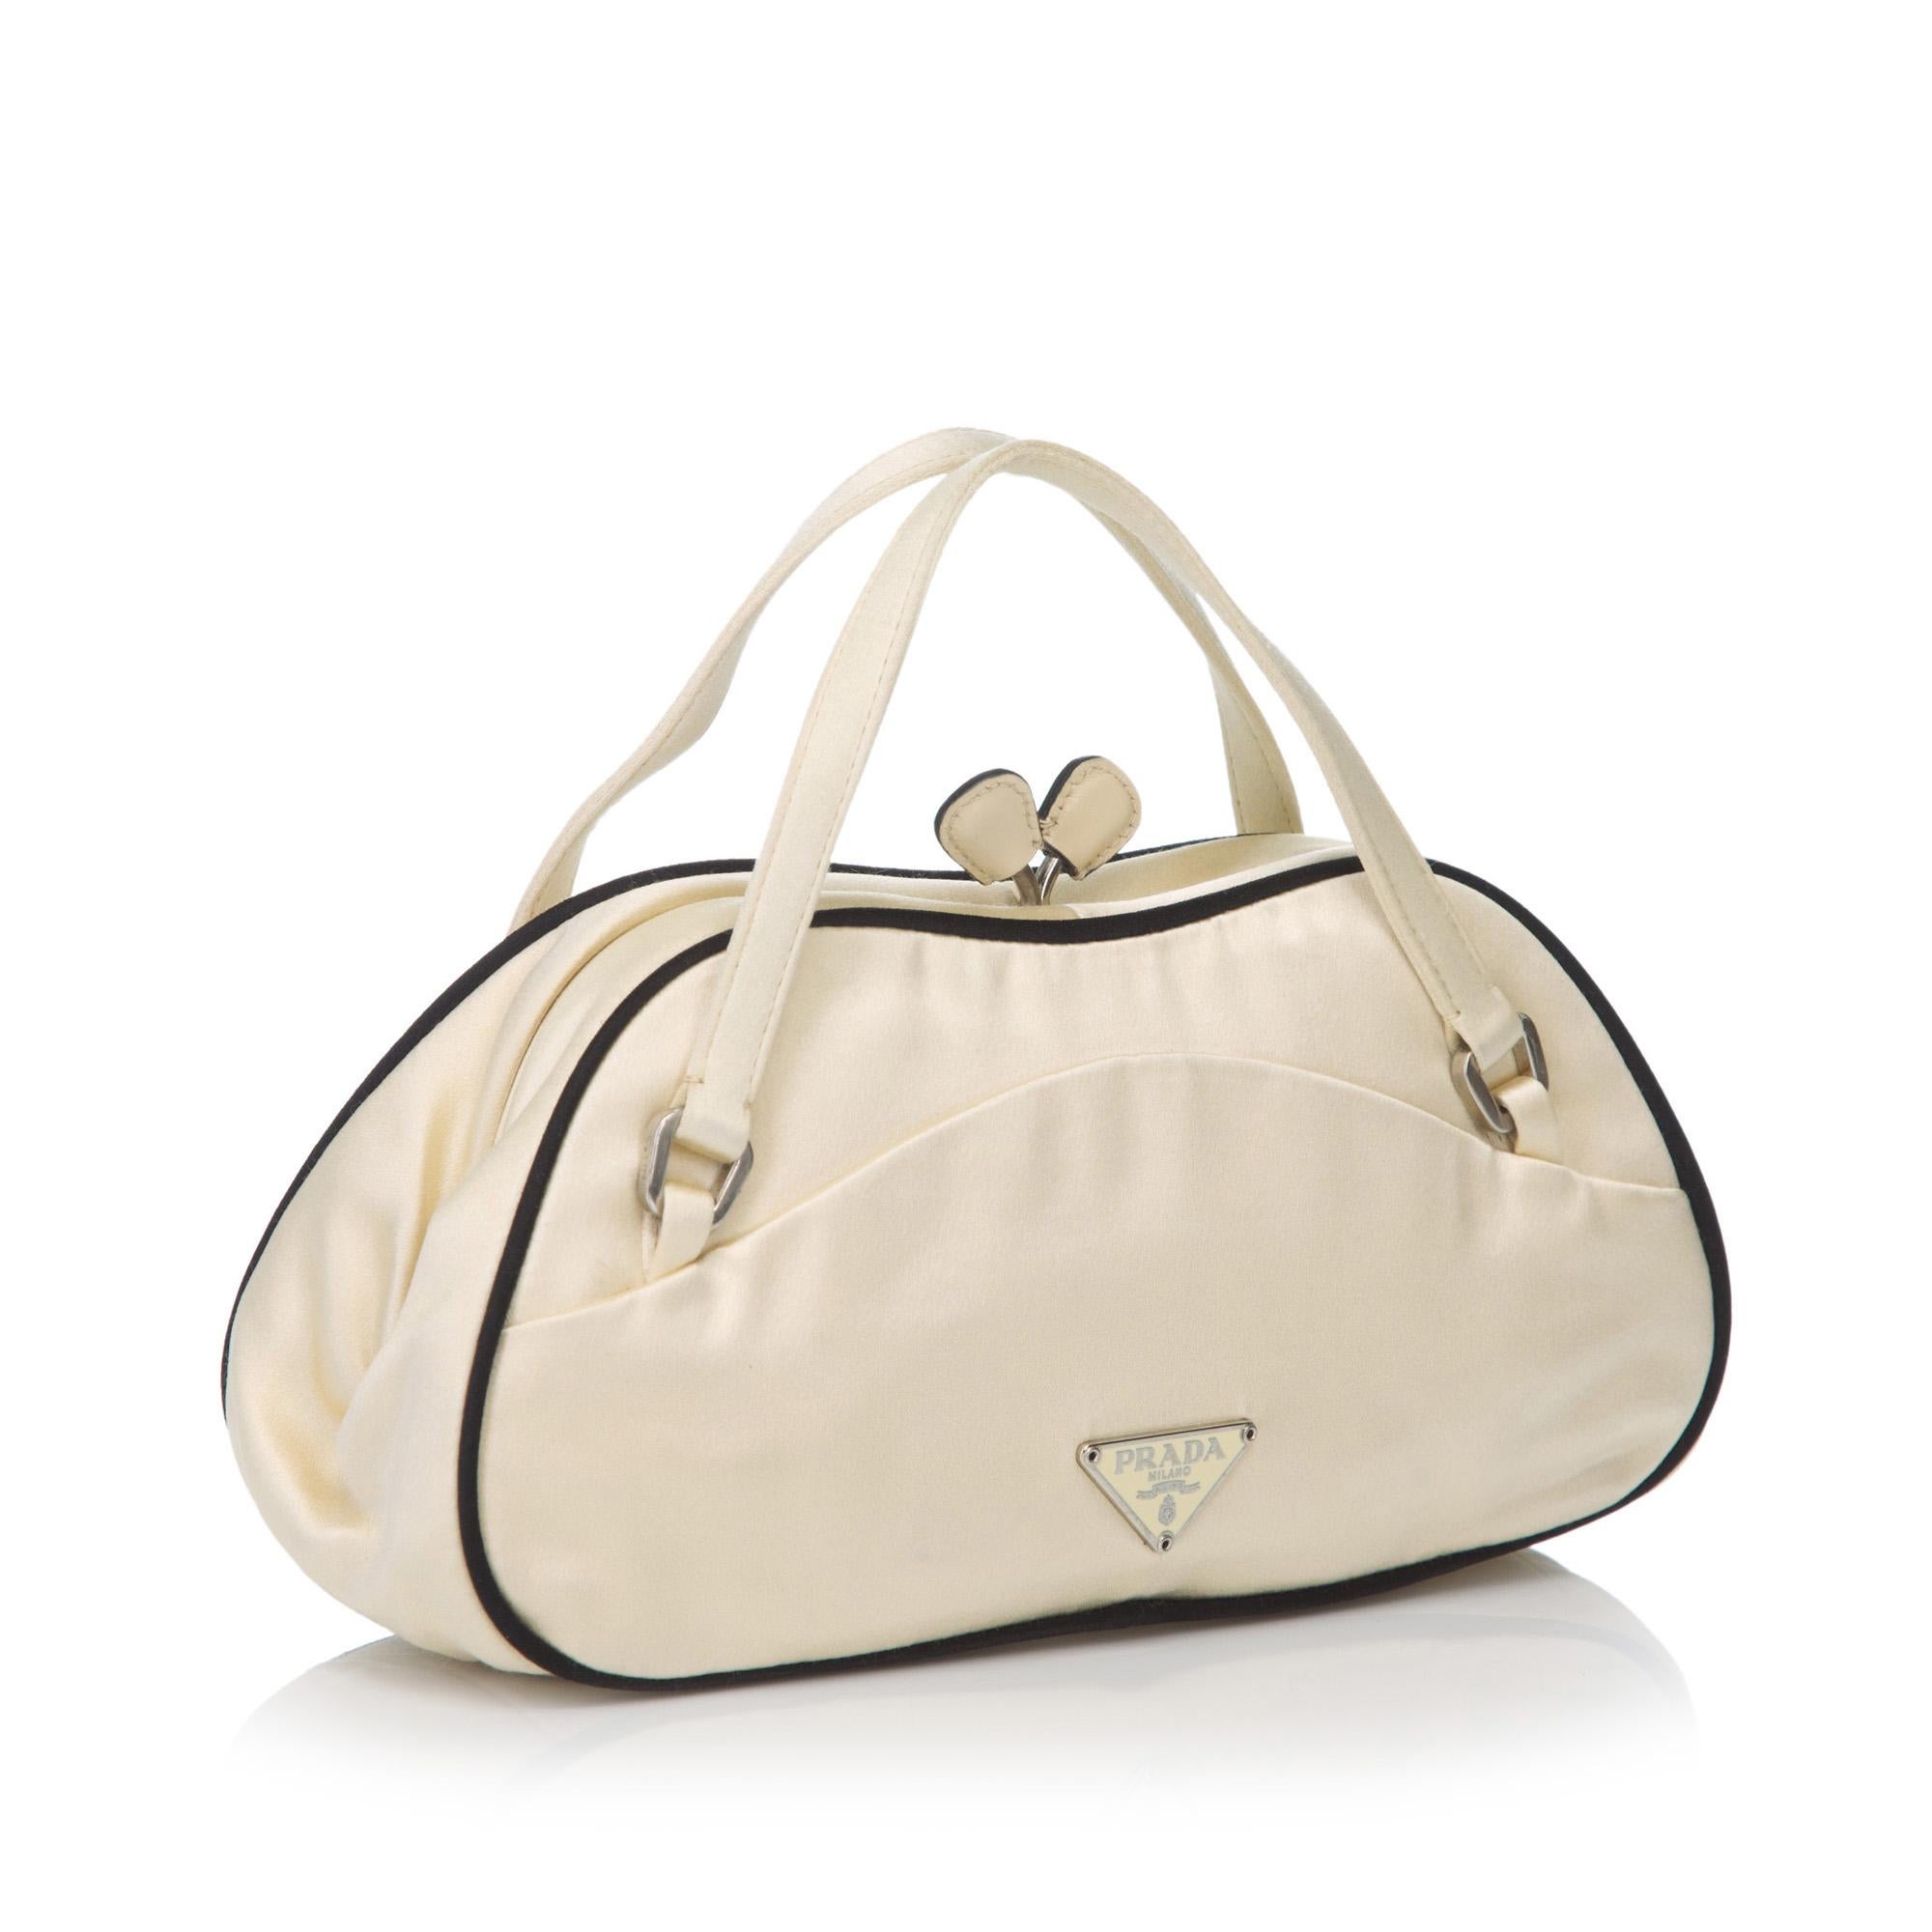 This handbag features a satin body, flat handles, kiss lock closure, and interior slip pocket. It carries as B+ condition rating.

Inclusions: 
Dust Bag

Dimensions:
Length: 21.50 cm
Width: 10.50 cm
Depth: 7.00 cm
Hand Drop: 6.00 cm

Material: